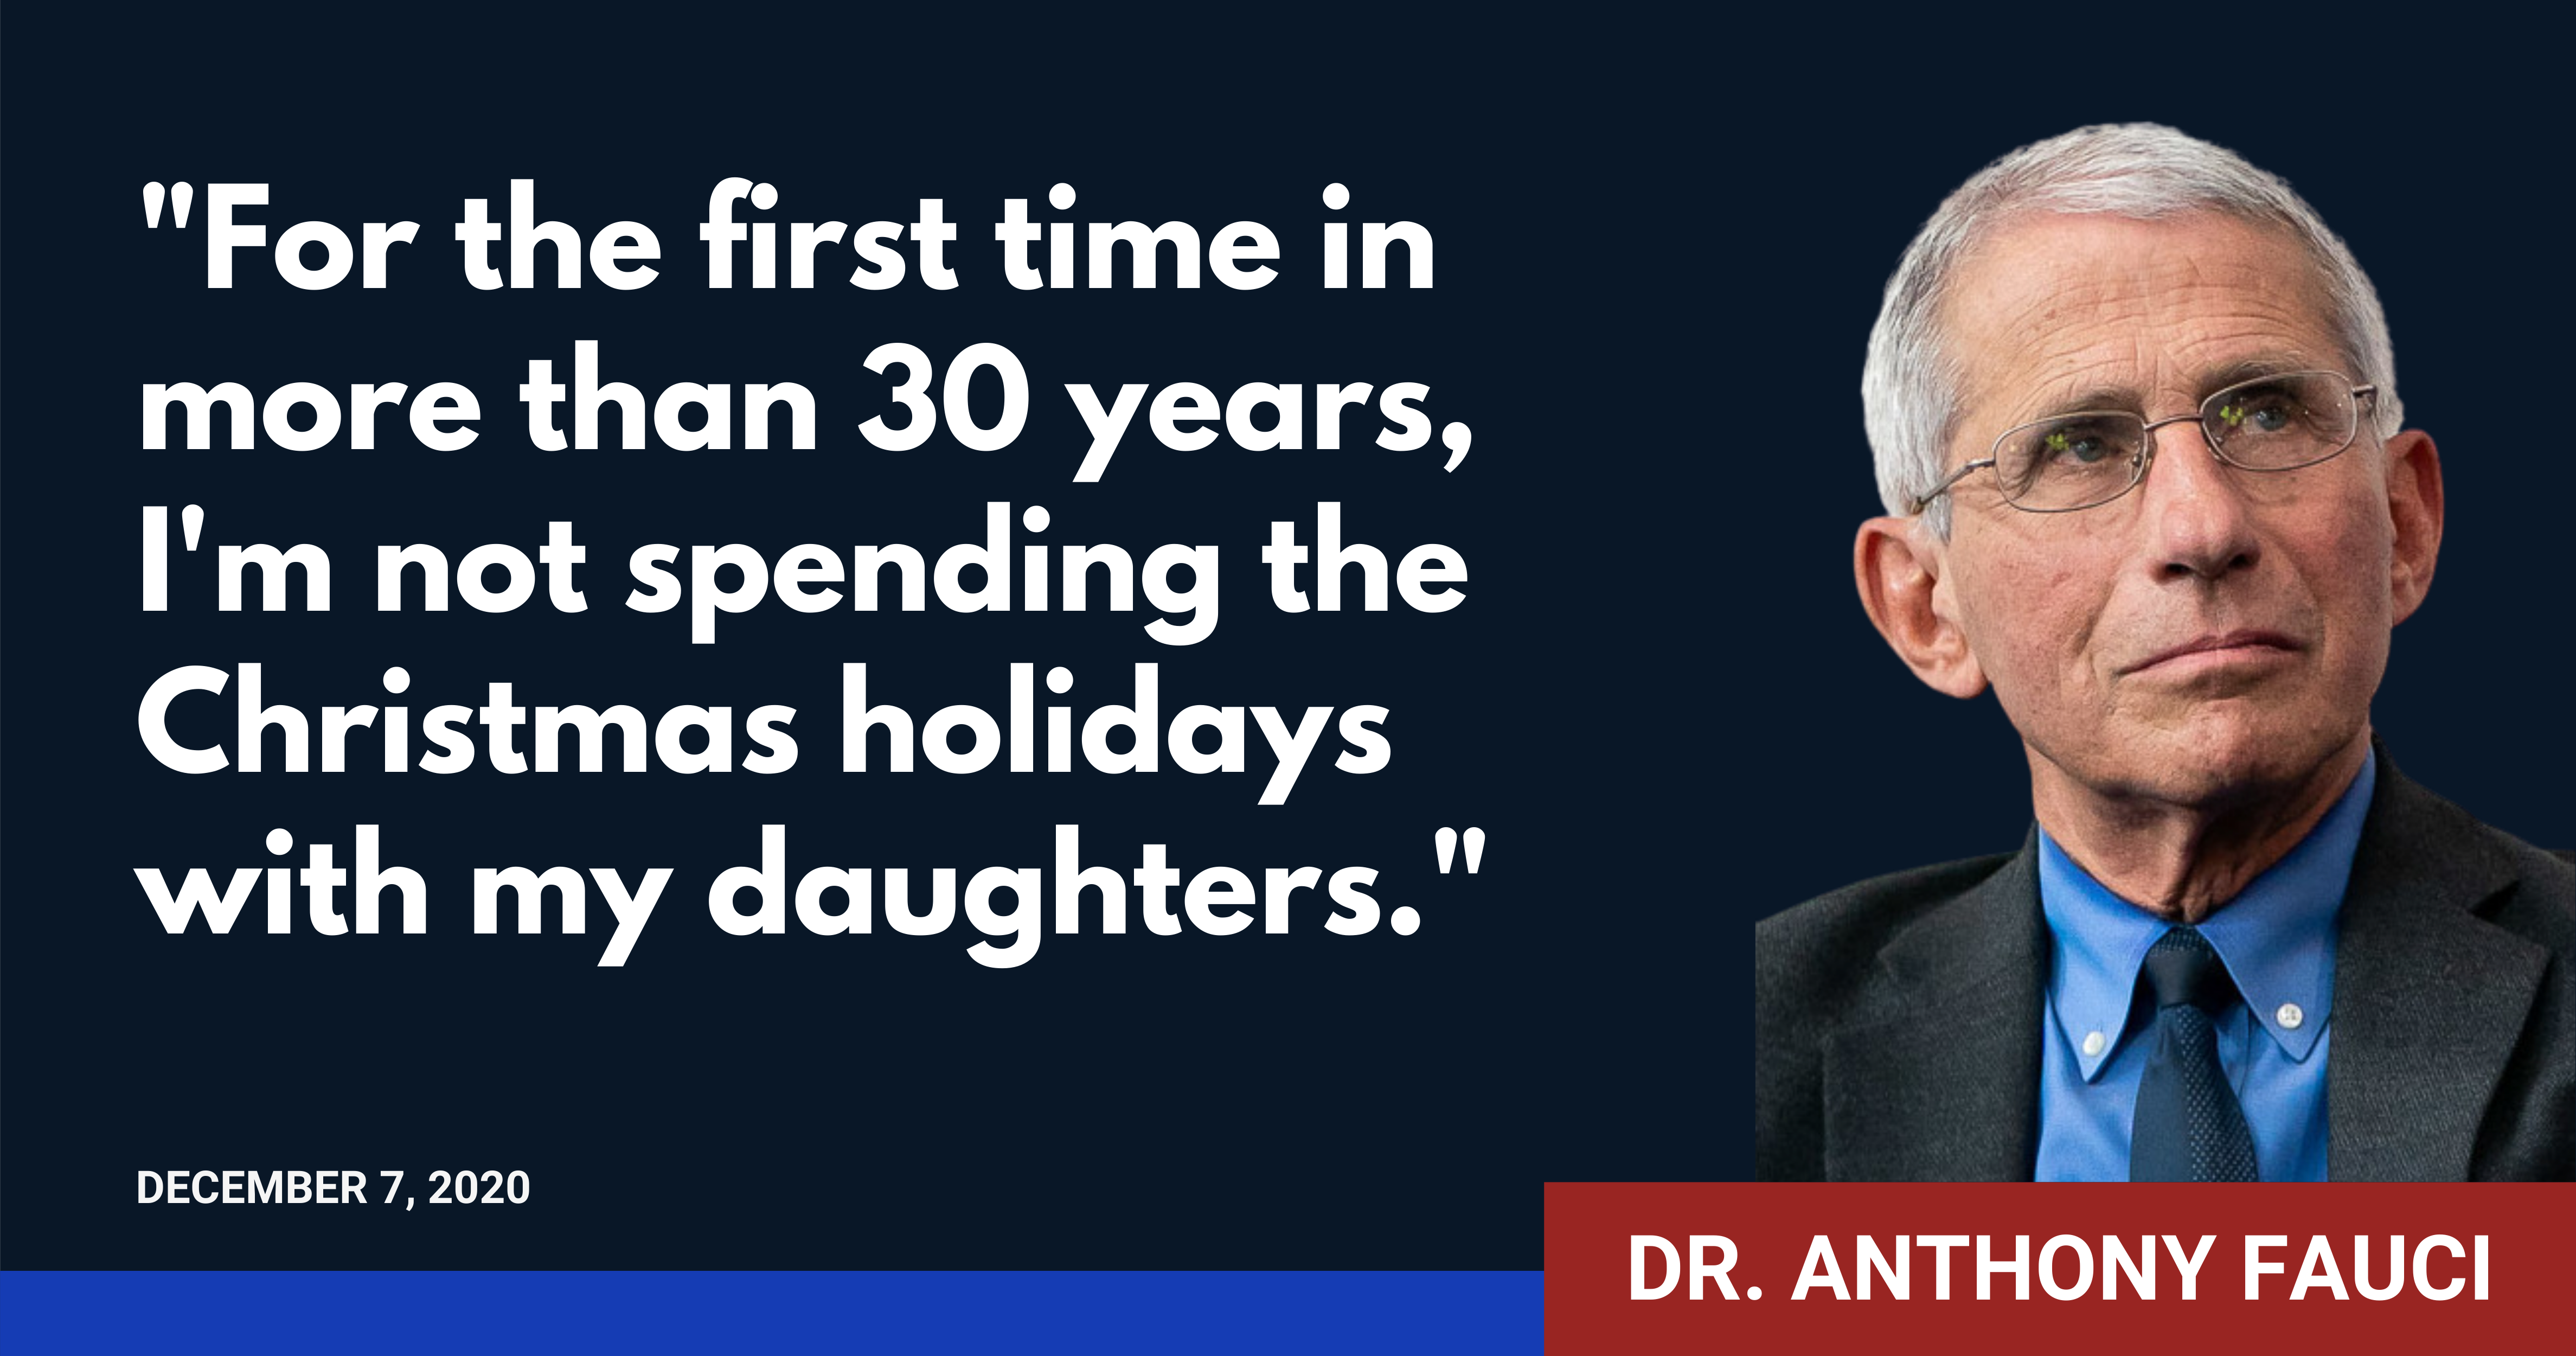 Dr. Anthony Fauci has changed his holiday plans due to COVID-19.